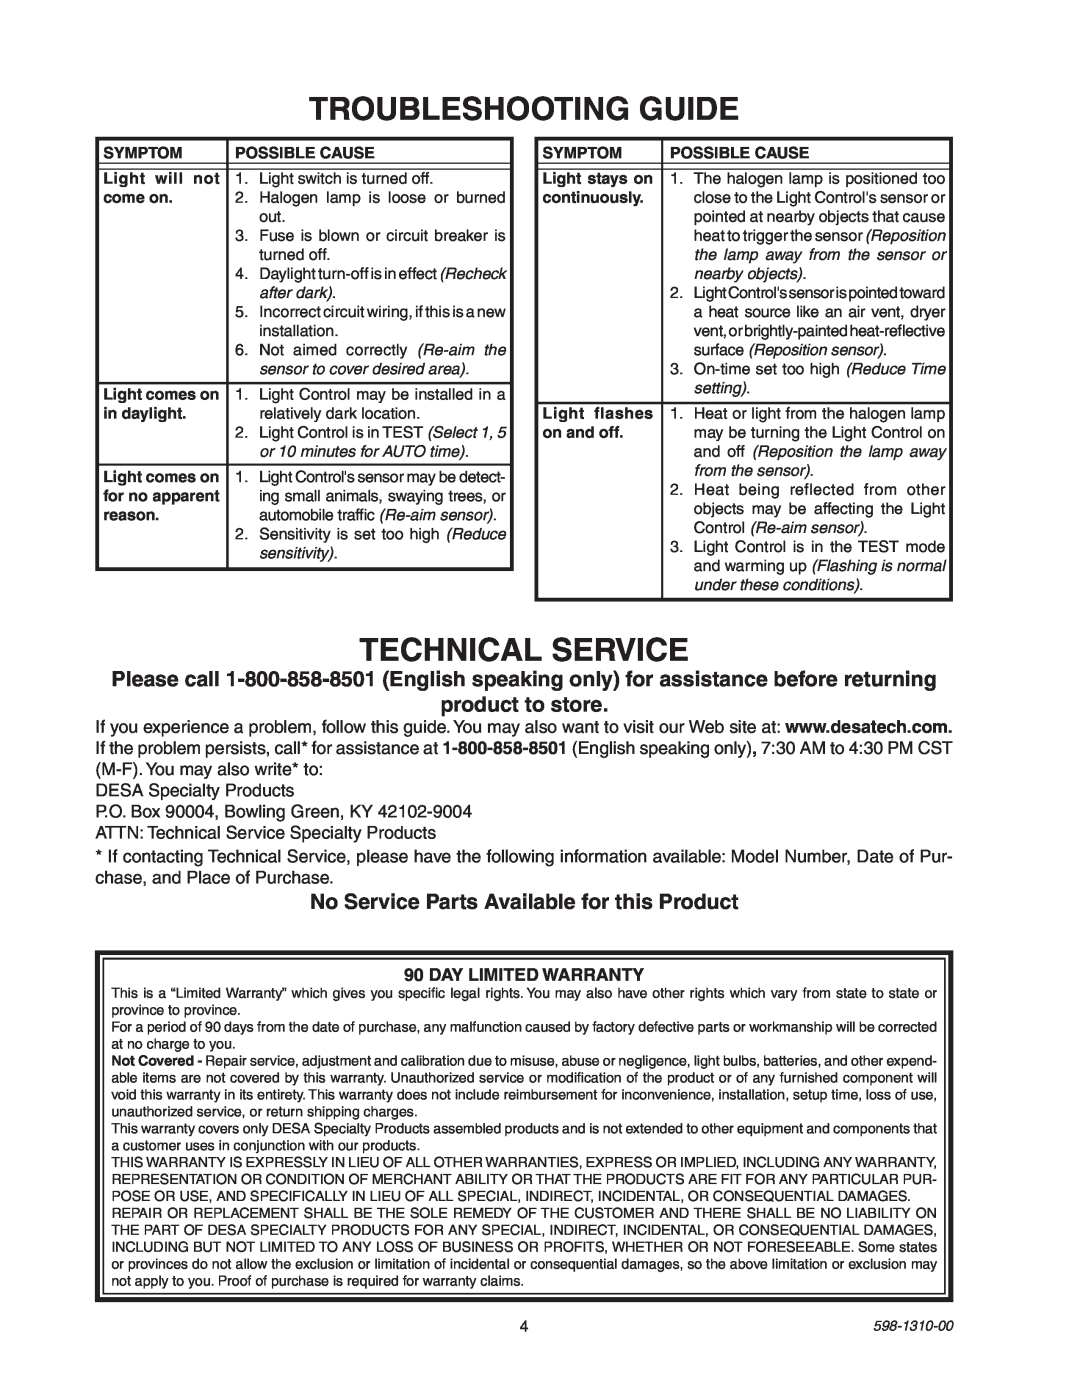 Desa 5511 manual Troubleshooting Guide, Technical Service, product to store, No Service Parts Available for this Product 